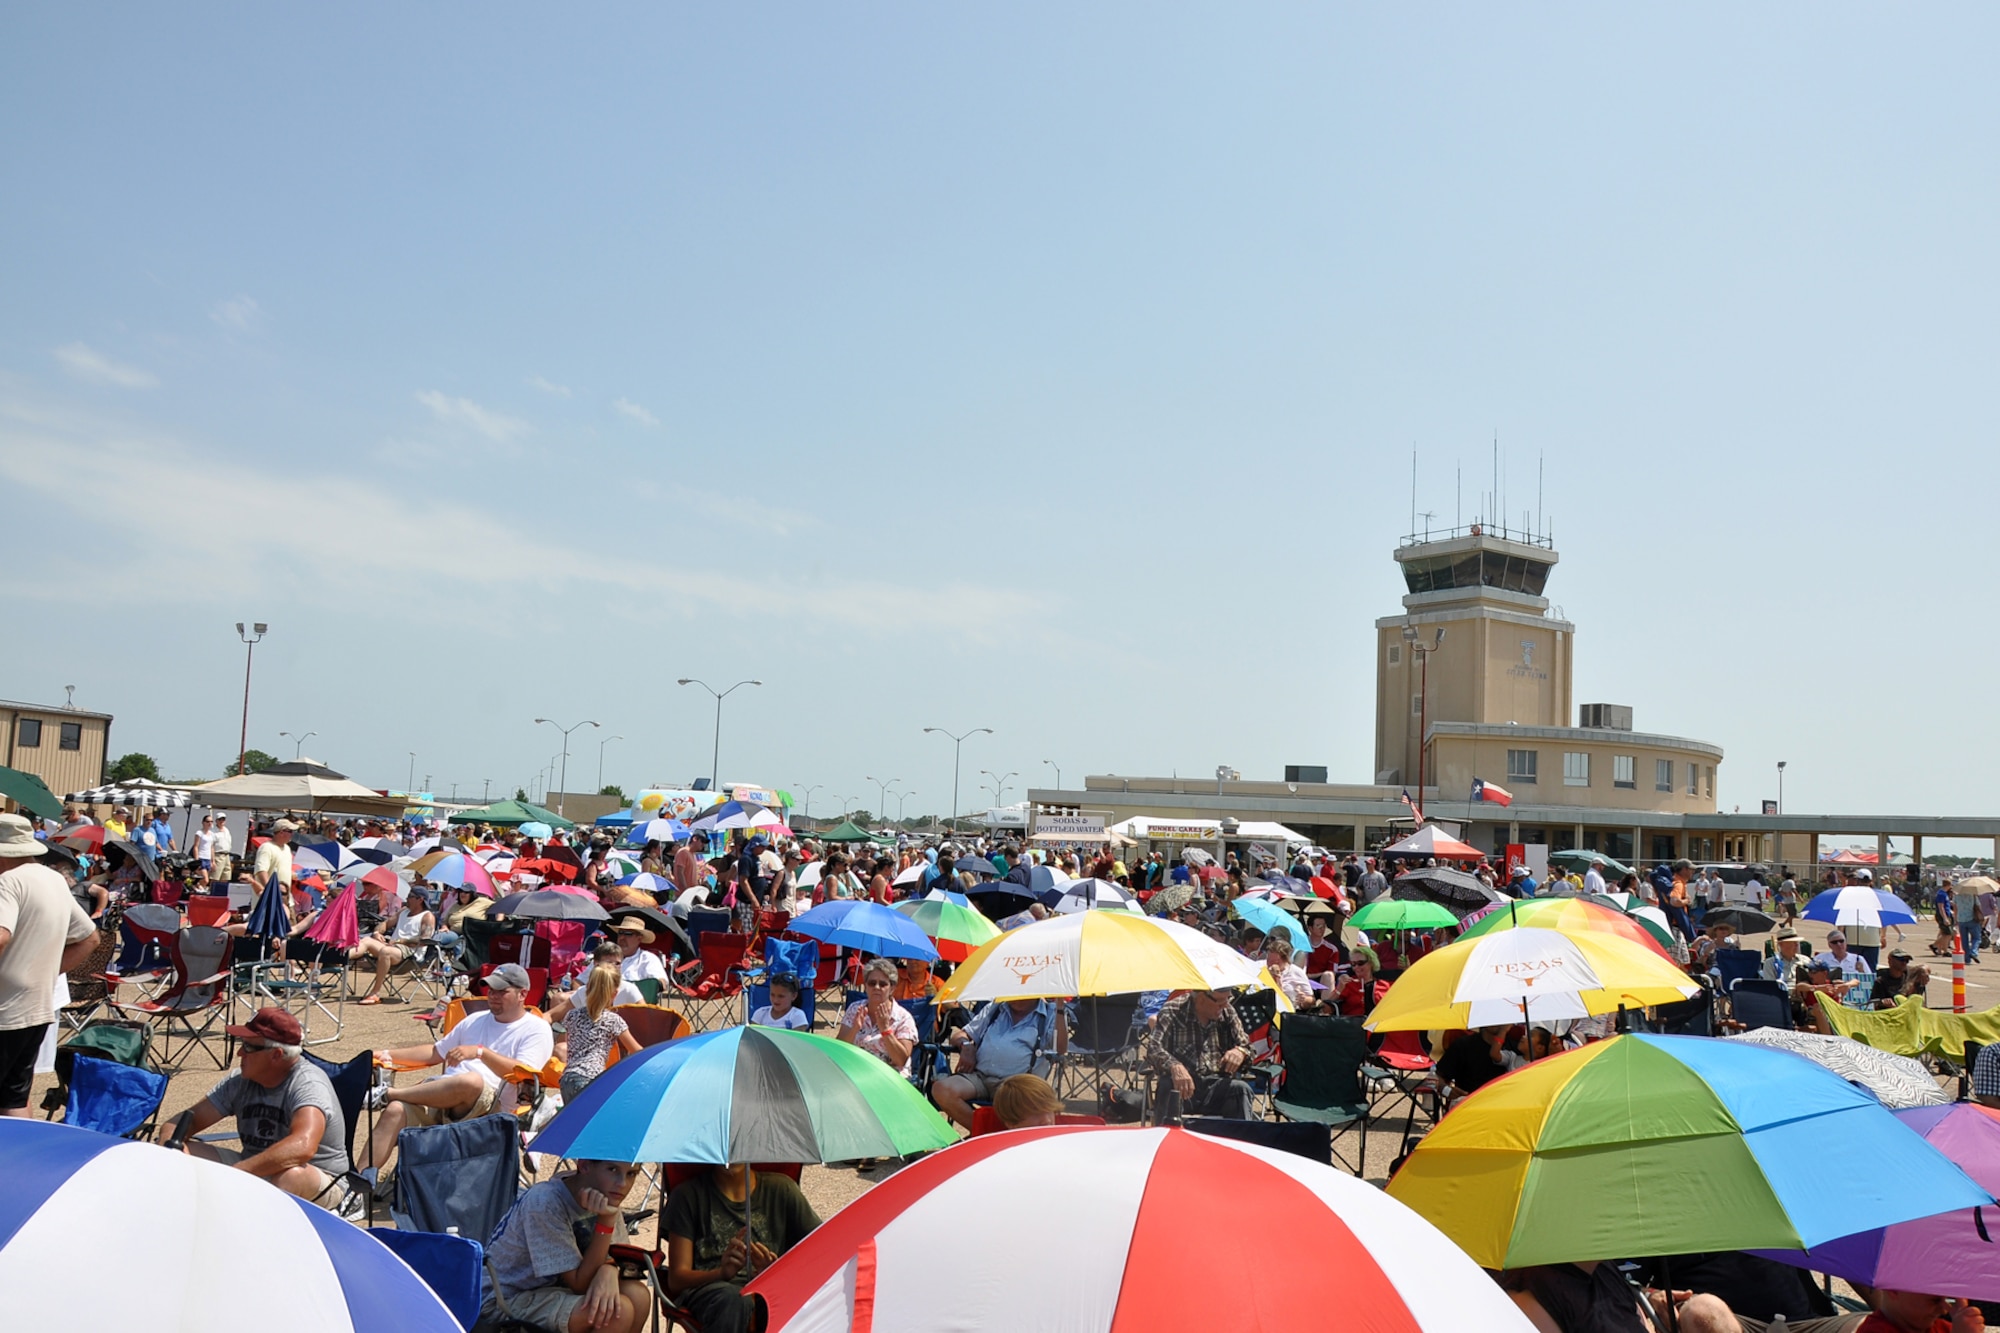 More than 20,000 spectators brave triple digit heat to watch the performers at the “Wings Over Tyler Air Show” at the Tyler Regional Airport in Tyler, Texas, July 3, 2011. Thousands of spectators crowded the airfield, toting lawn chairs, umbrellas and sun screen, determined to enjoy the show despite the triple-digit heat. (U.S. Air Force photo/Tech. Sgt. Jeff Walston)